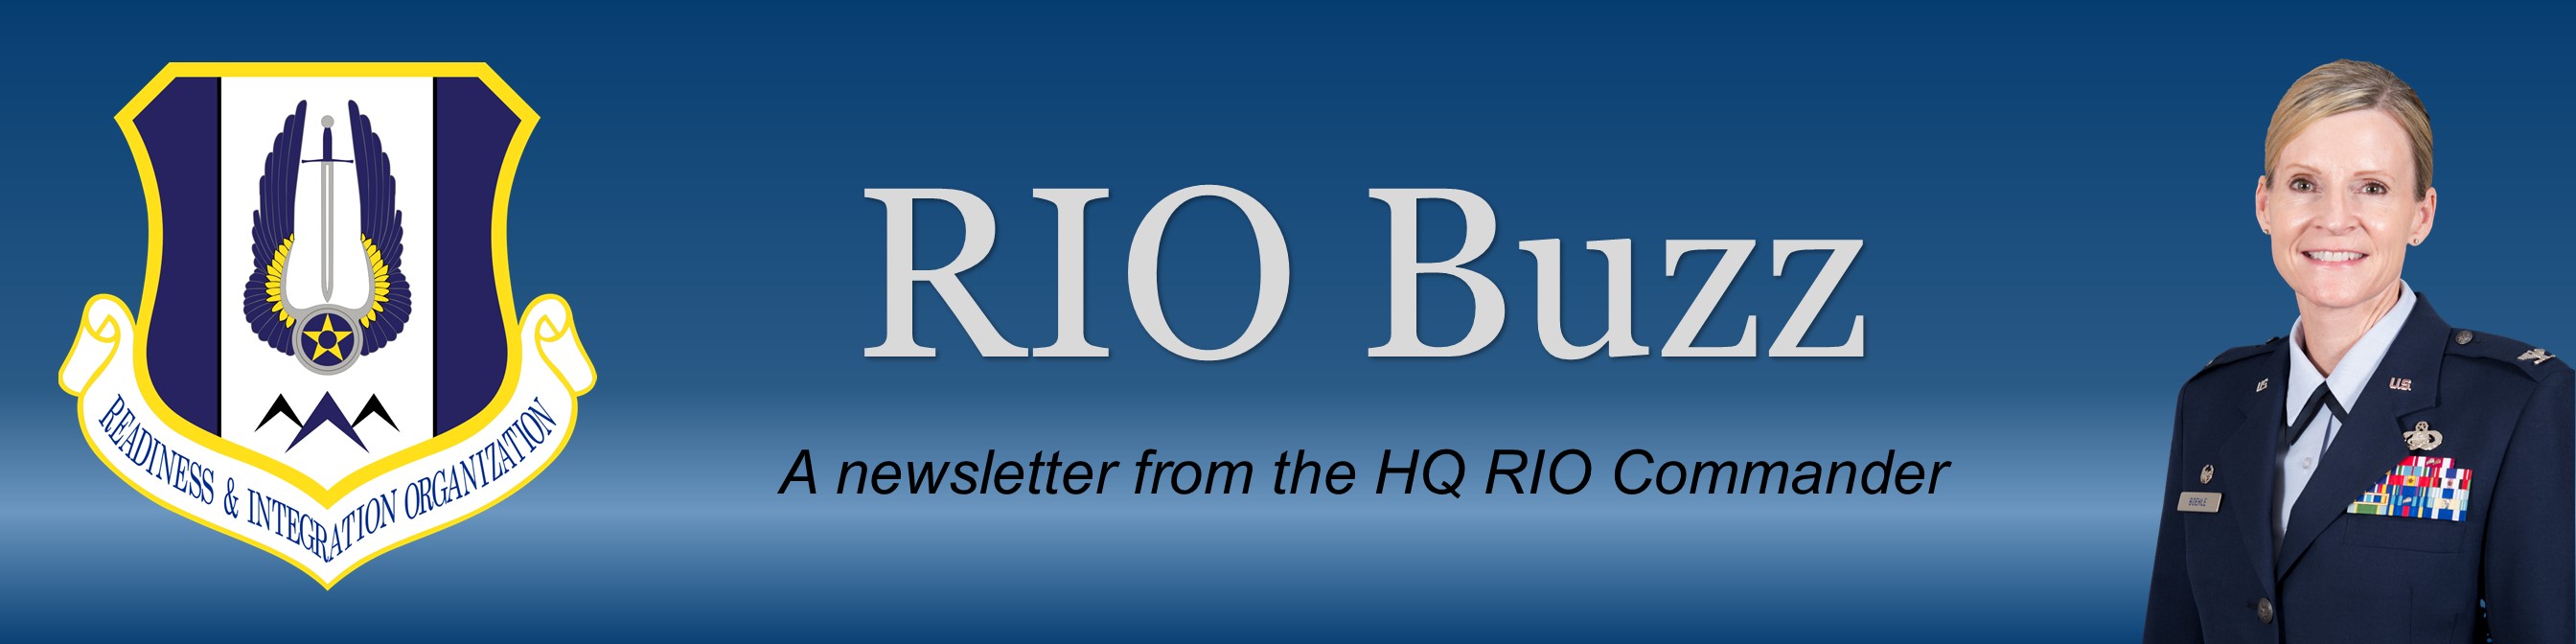 RIO Buzz banner with shield and commander's photo